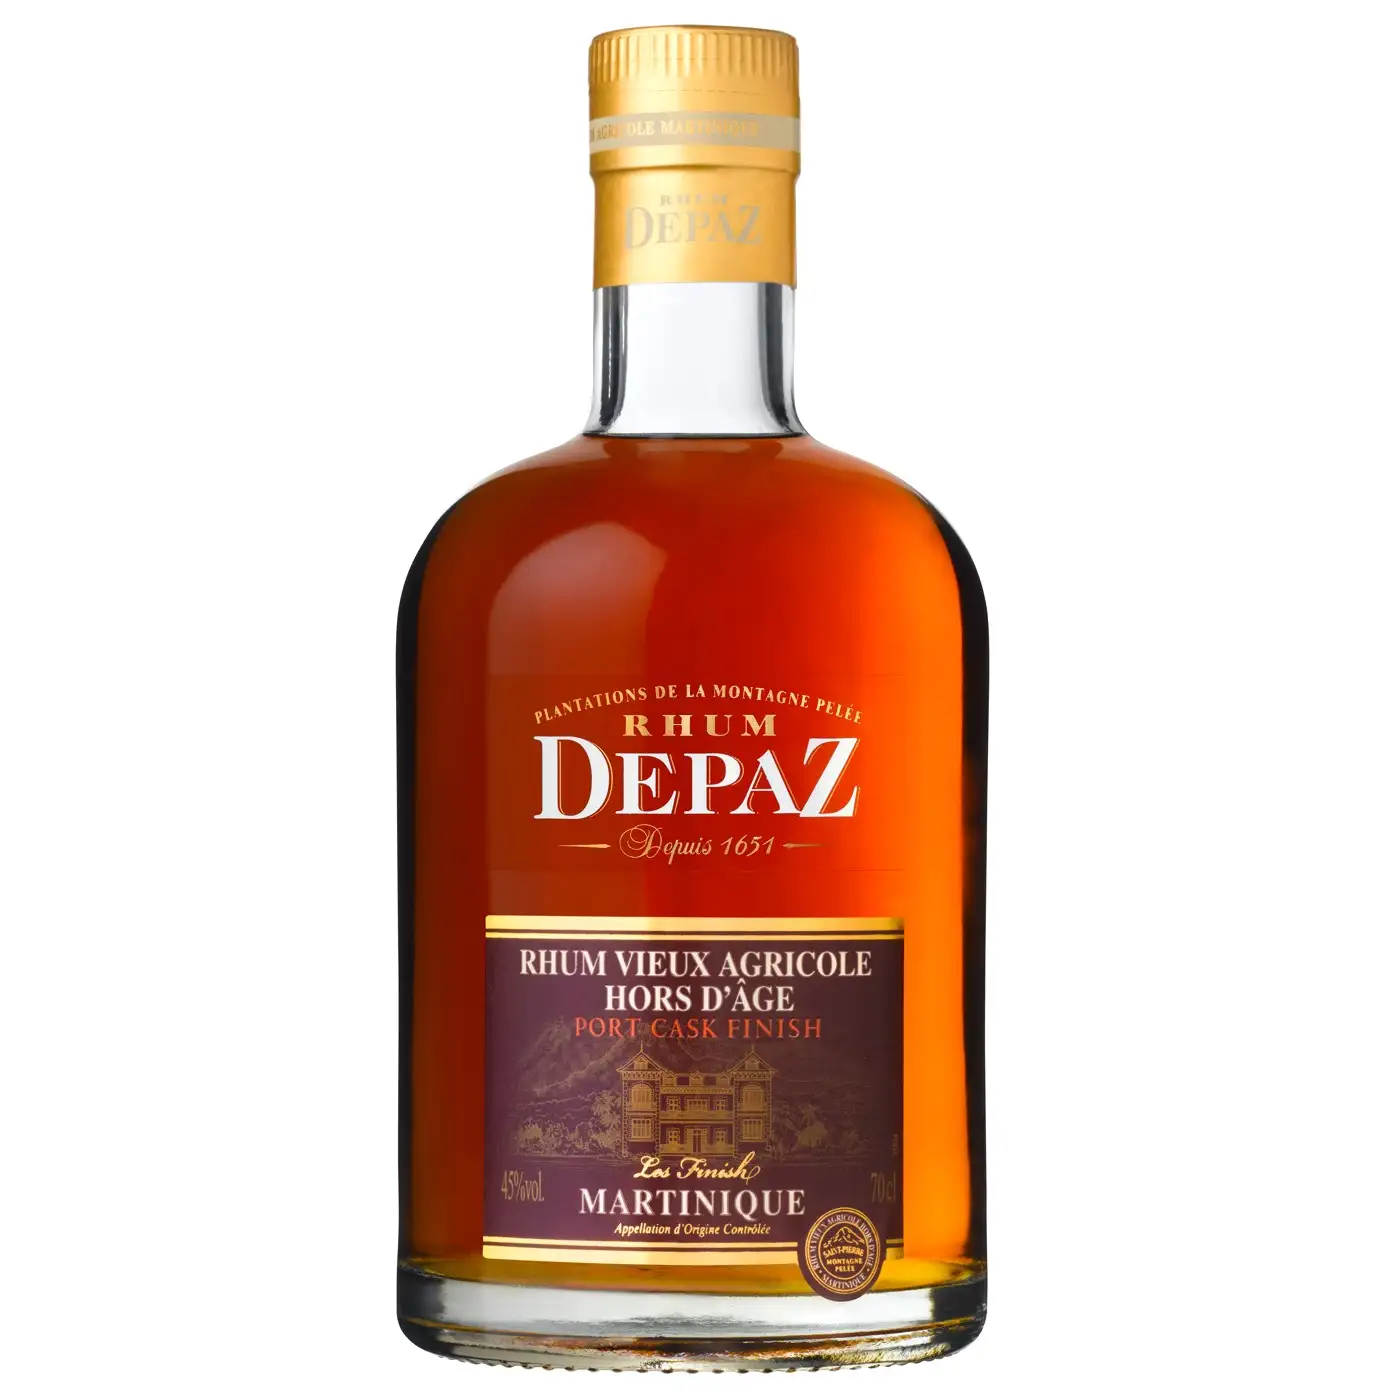 Image of the front of the bottle of the rum Hors d’Âge Port Cask Finish